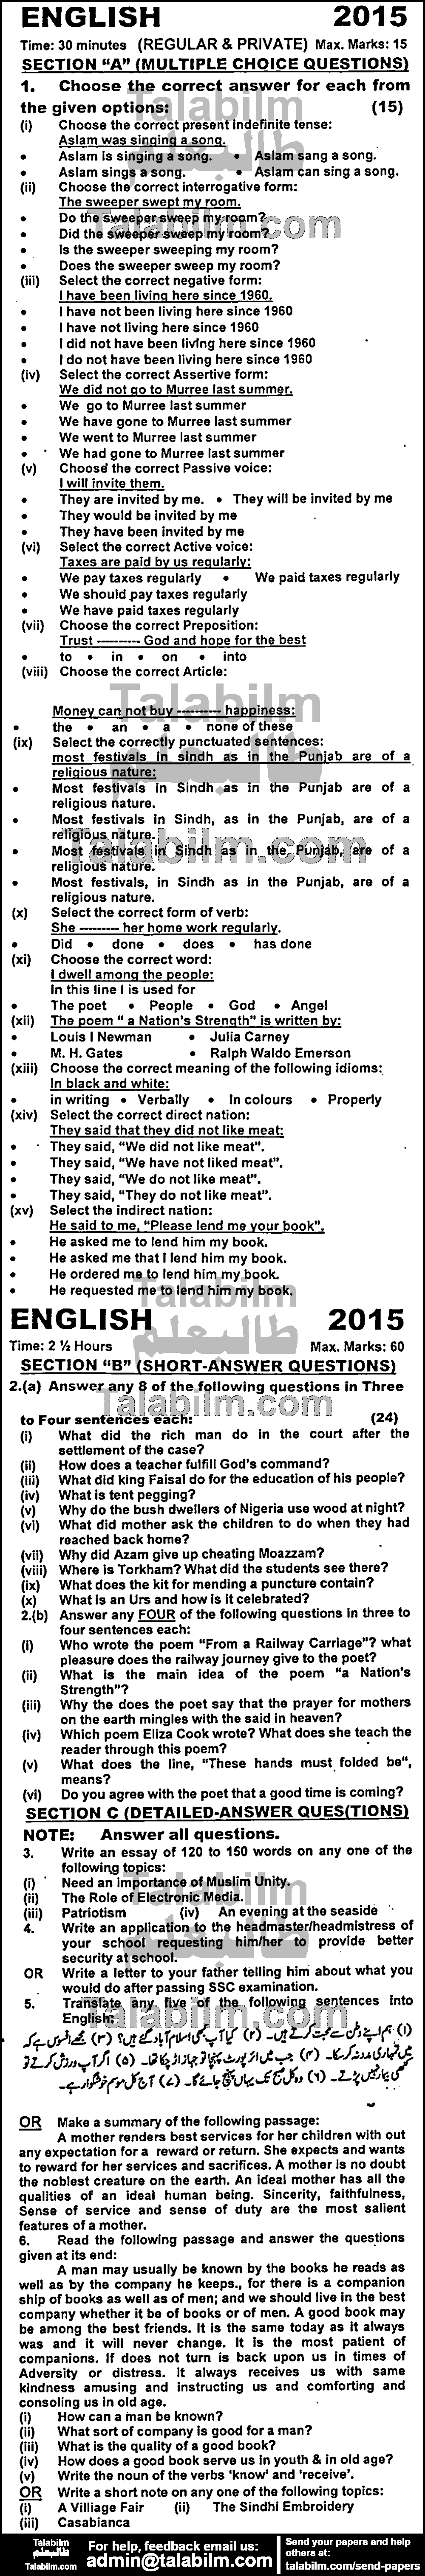 English 0 past paper for 2015 Group-I